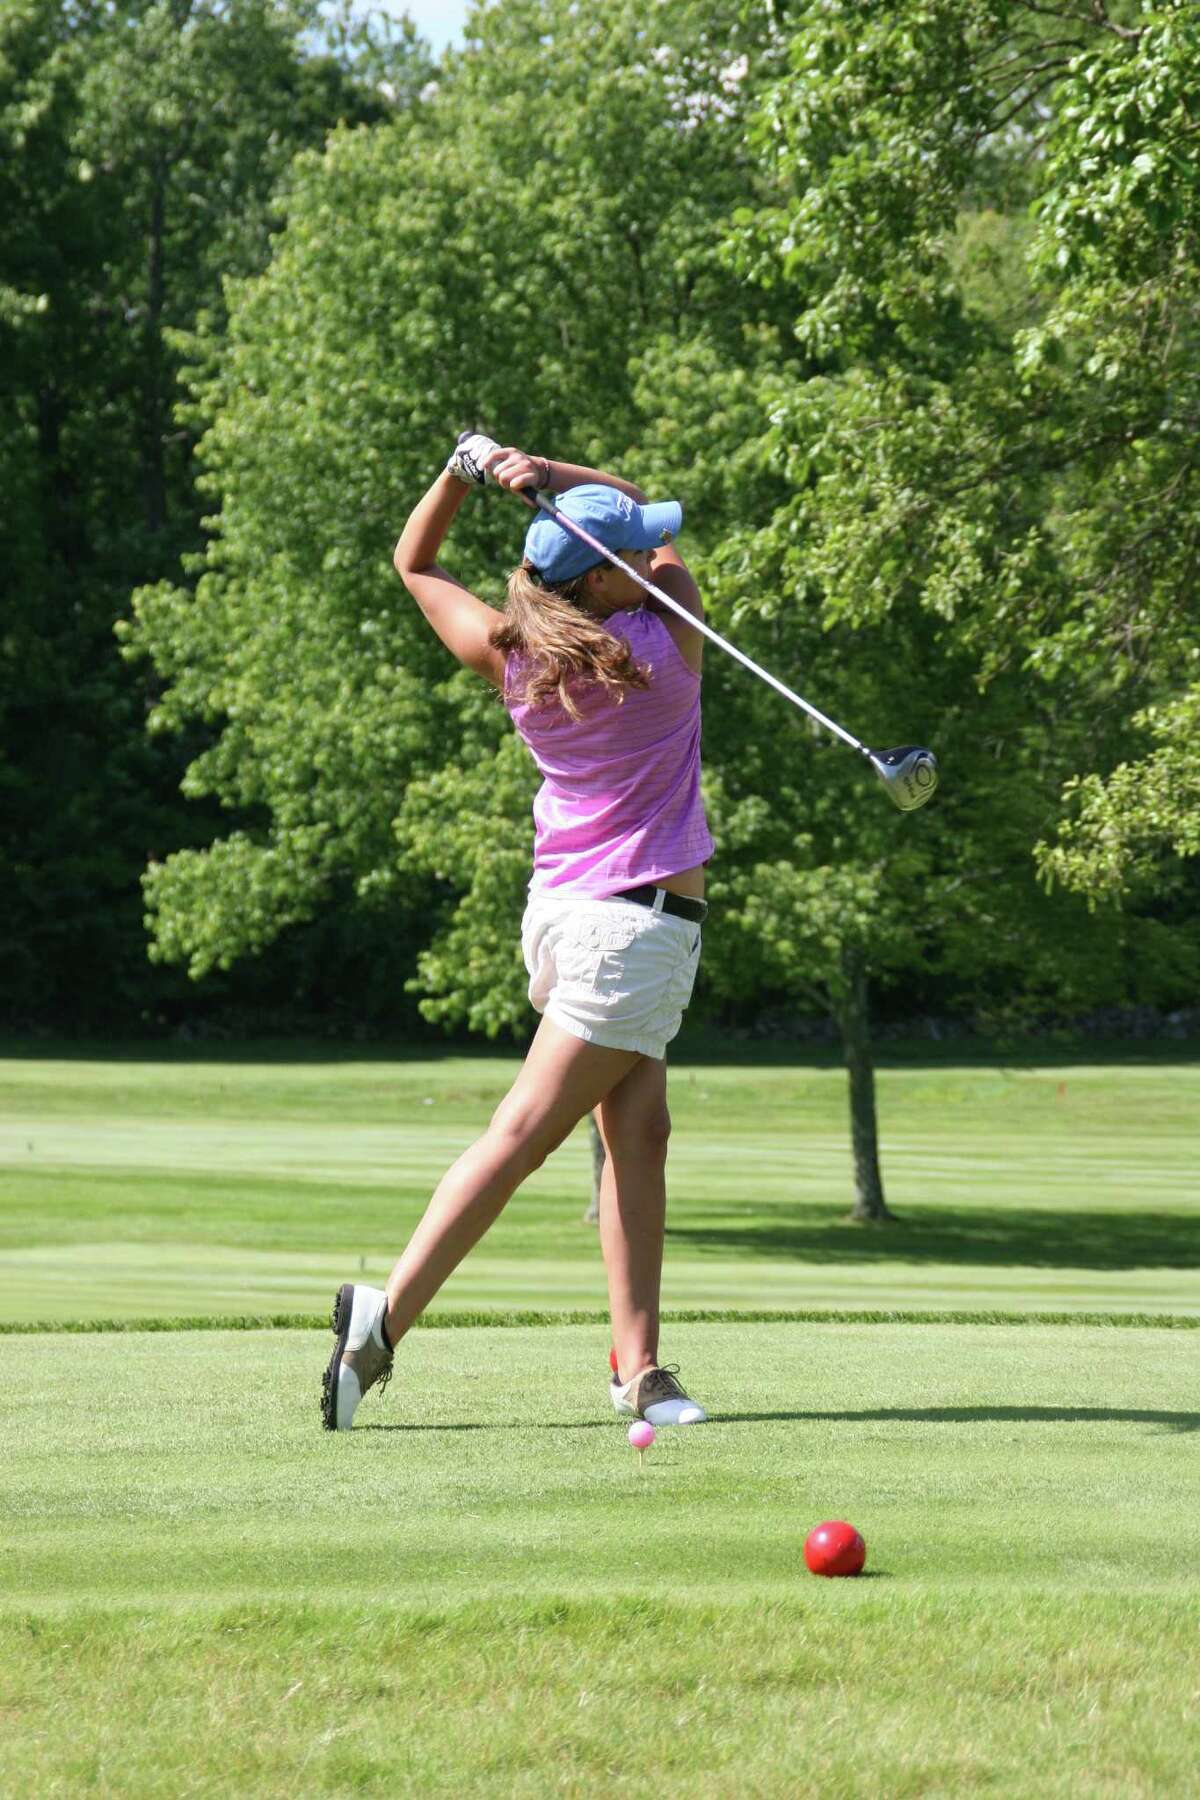 Weston's Carlye Rosen tees off. Rosen led the team by averaging a 50 for nine holes, and she finished tied for third at the SWC championships.